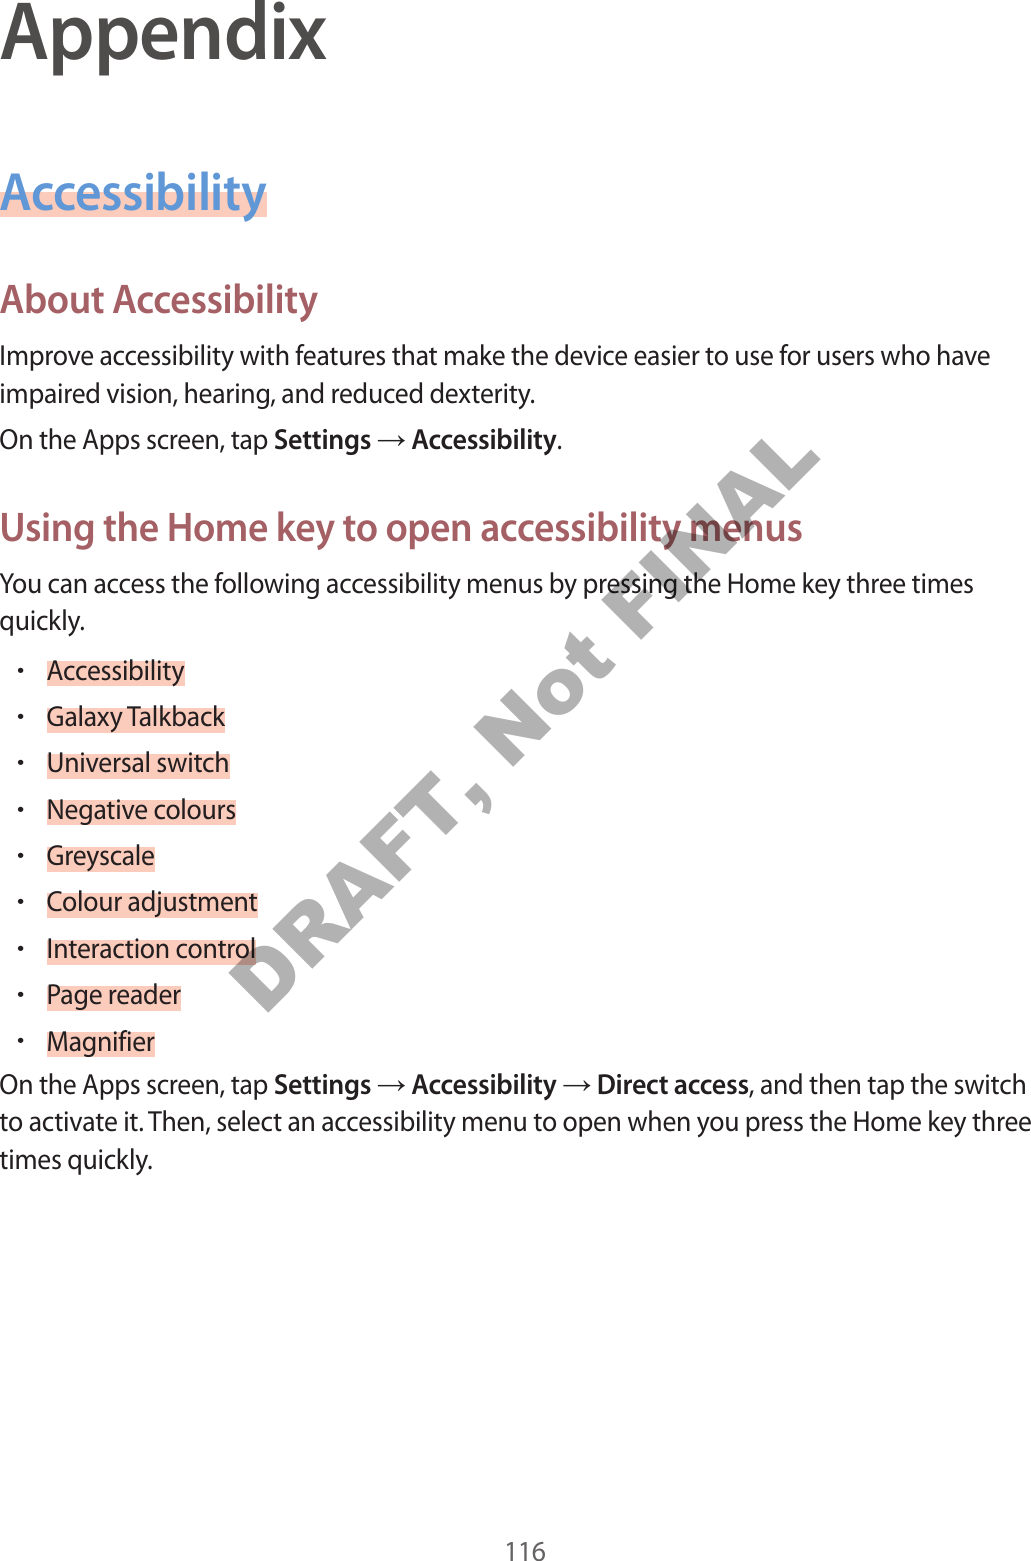 116AppendixAccessibilityAbout AccessibilityImprove accessibility with features that make the device easier to use for users who have impaired vision, hearing, and reduced dexterity.On the Apps screen, tap Settings  Accessibility.Using the Home key to open accessibility menusYou can access the following accessibility menus by pressing the Home key three times quickly.•Accessibility•Galaxy Talkback•Universal switch•Negative colours•Greyscale•Colour adjustment•Interaction control•Page reader•MagnifierOn the Apps screen, tap Settings  Accessibility  Direct access, and then tap the switch to activate it. Then, select an accessibility menu to open when you press the Home key three times quickly.DRAFT, Not FINAL